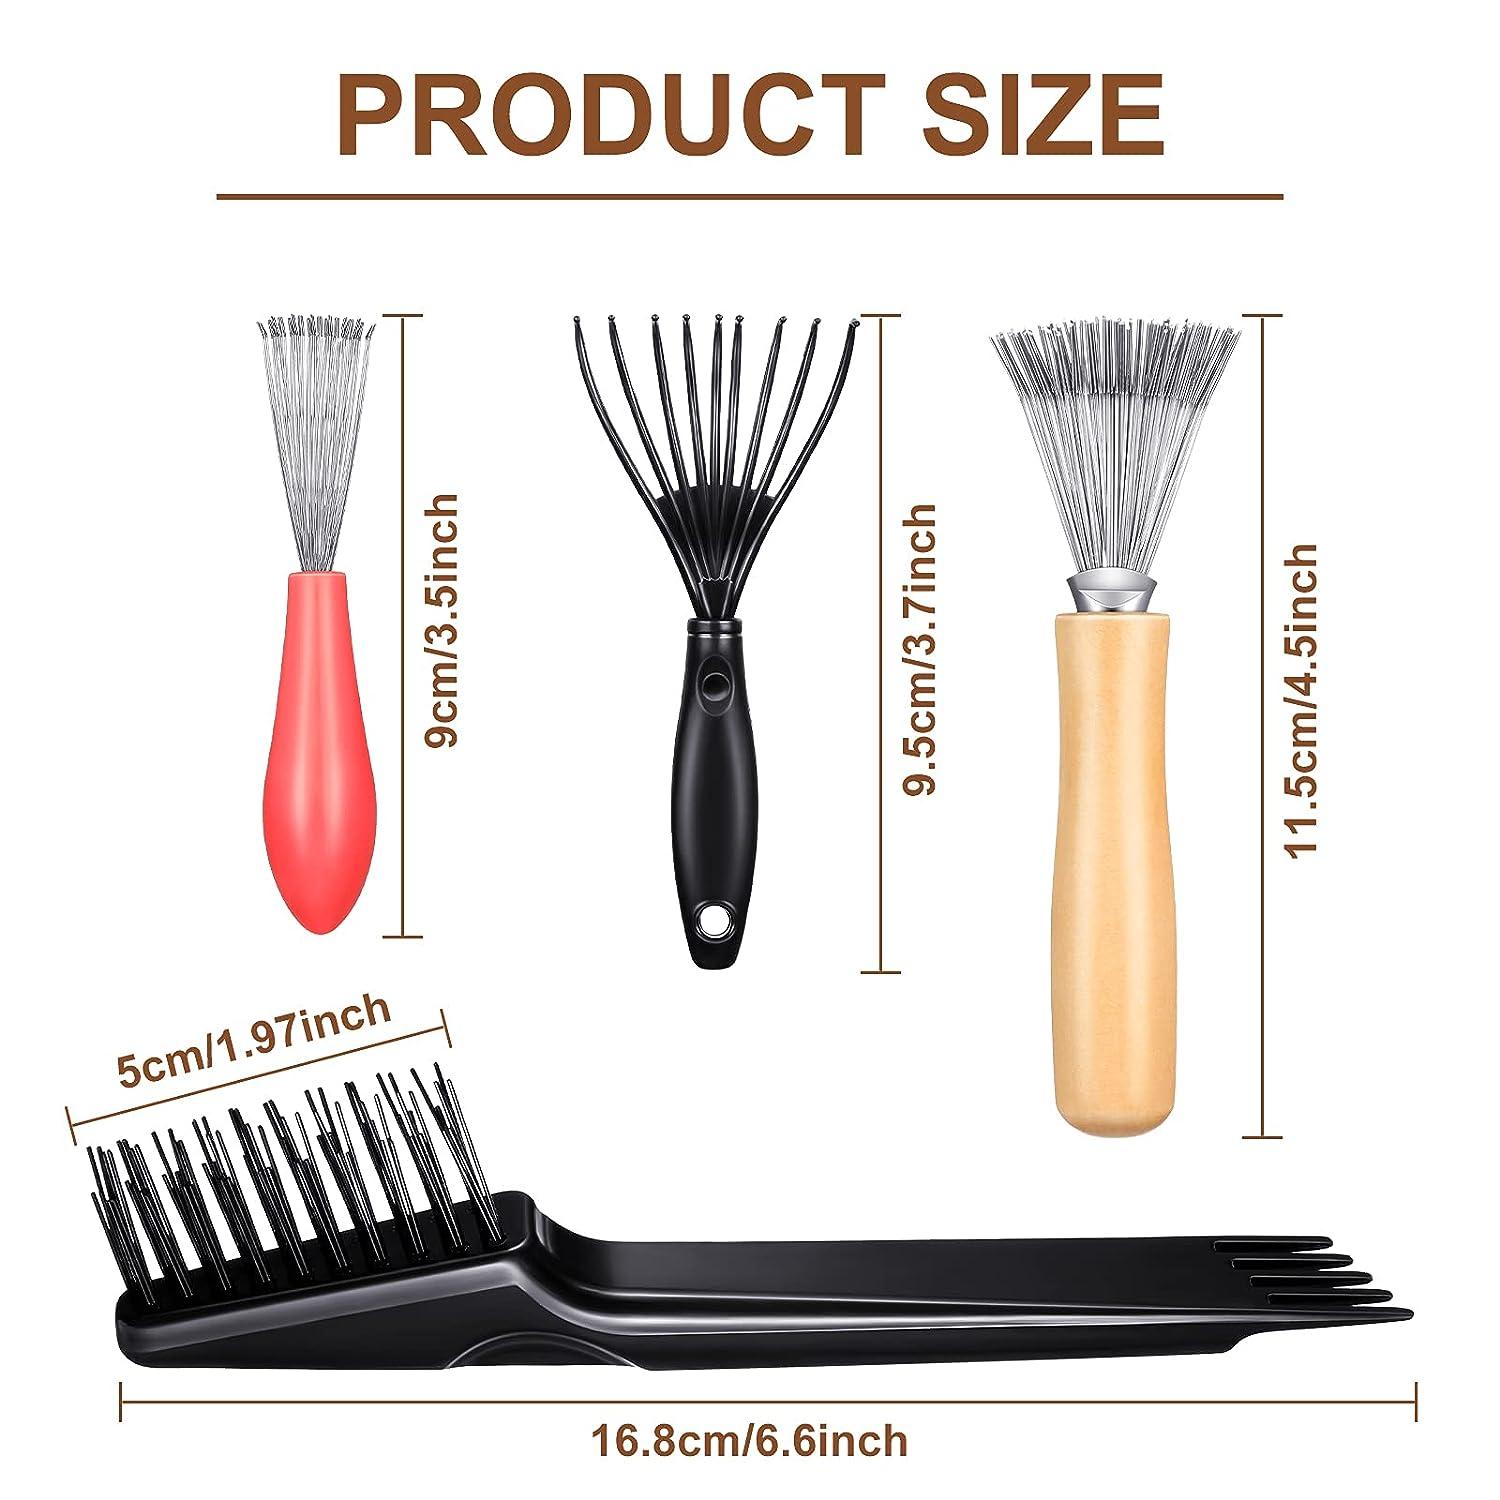 Hairbrush Cleaner Rake Tool Cleaning Brush Comb Embedded Tool for Home Comb